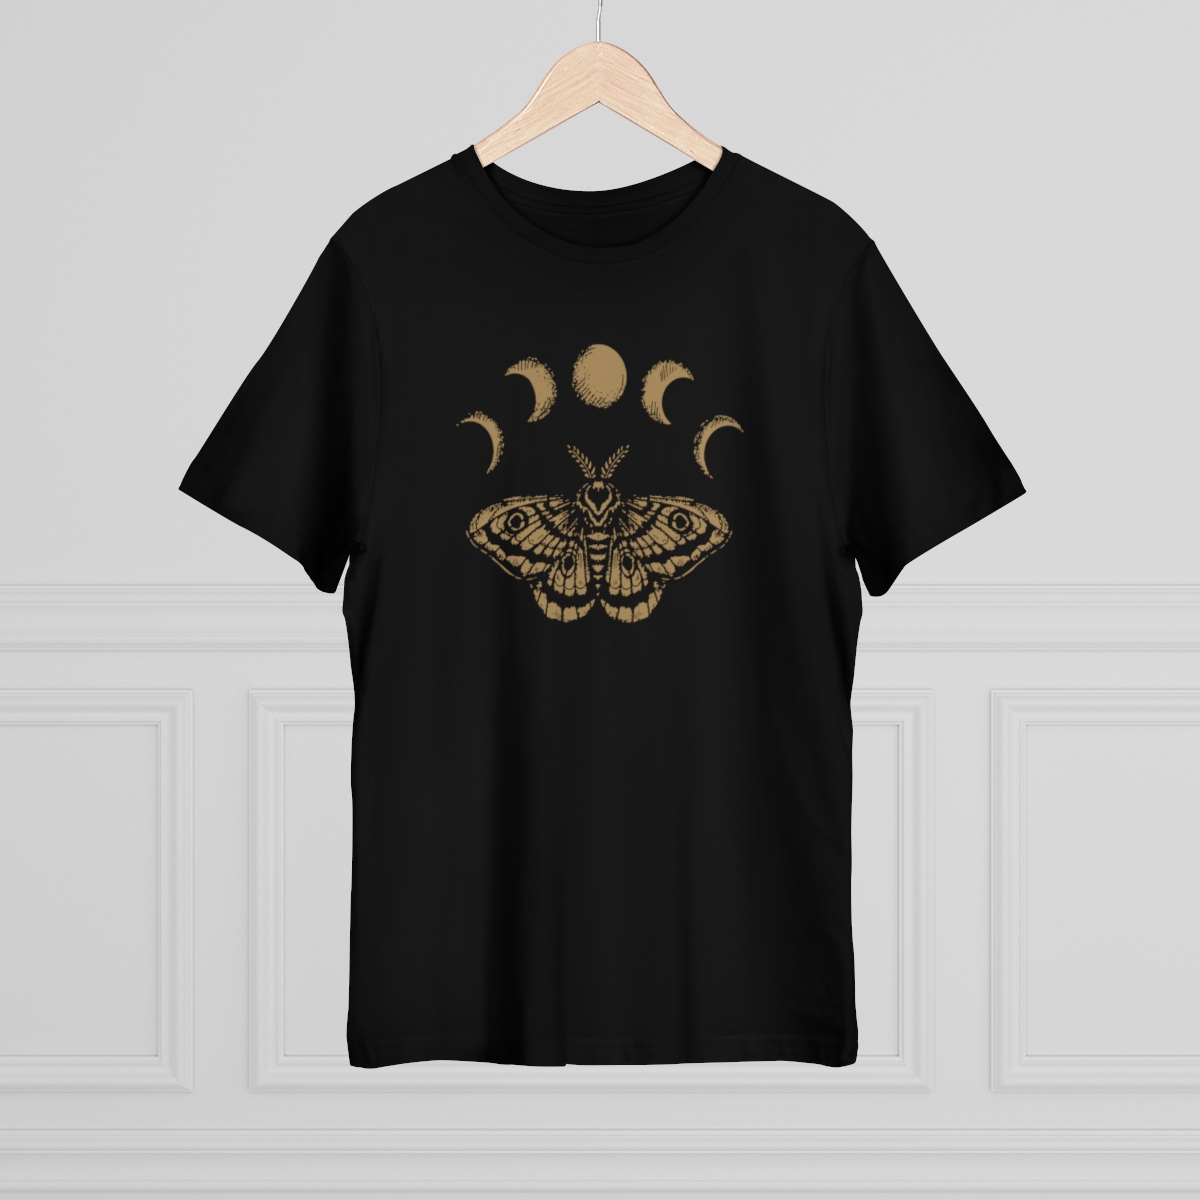 Unisex Deluxe T-shirt - Lume Moth & Moon Phases product thumbnail image